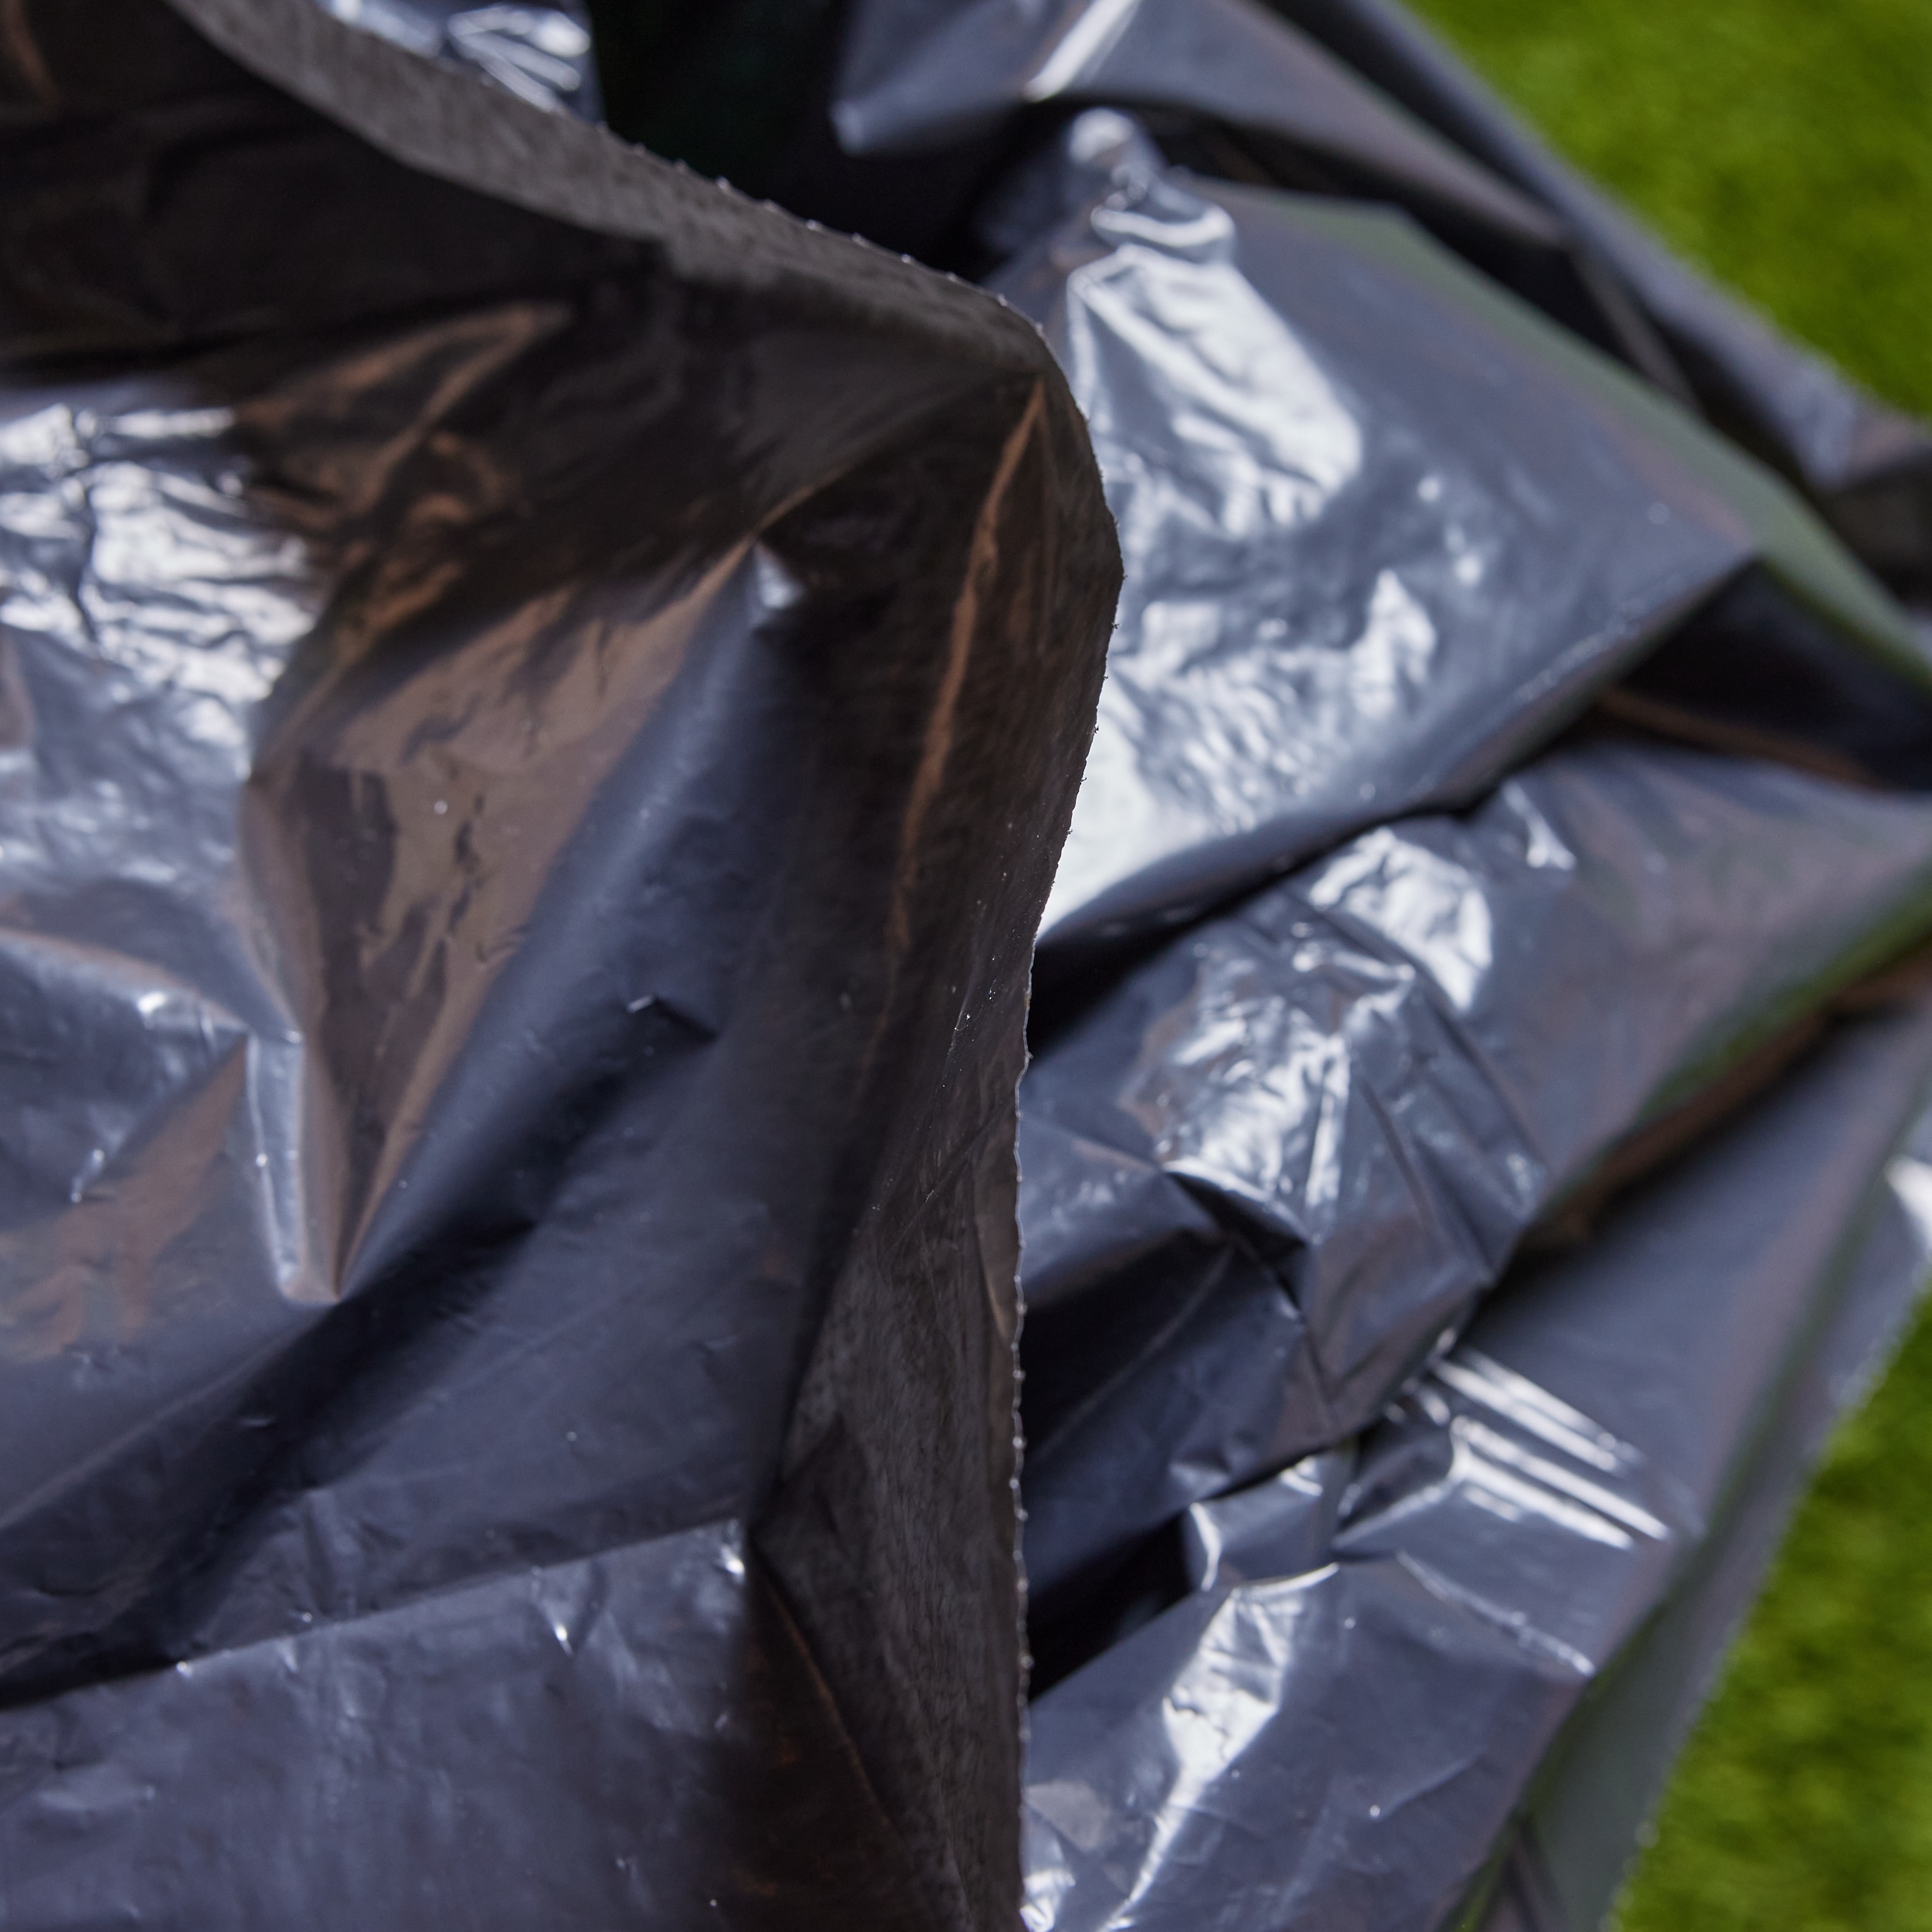 PlasticMill 100-Gallons Black Outdoor Plastic Lawn and Leaf Trash